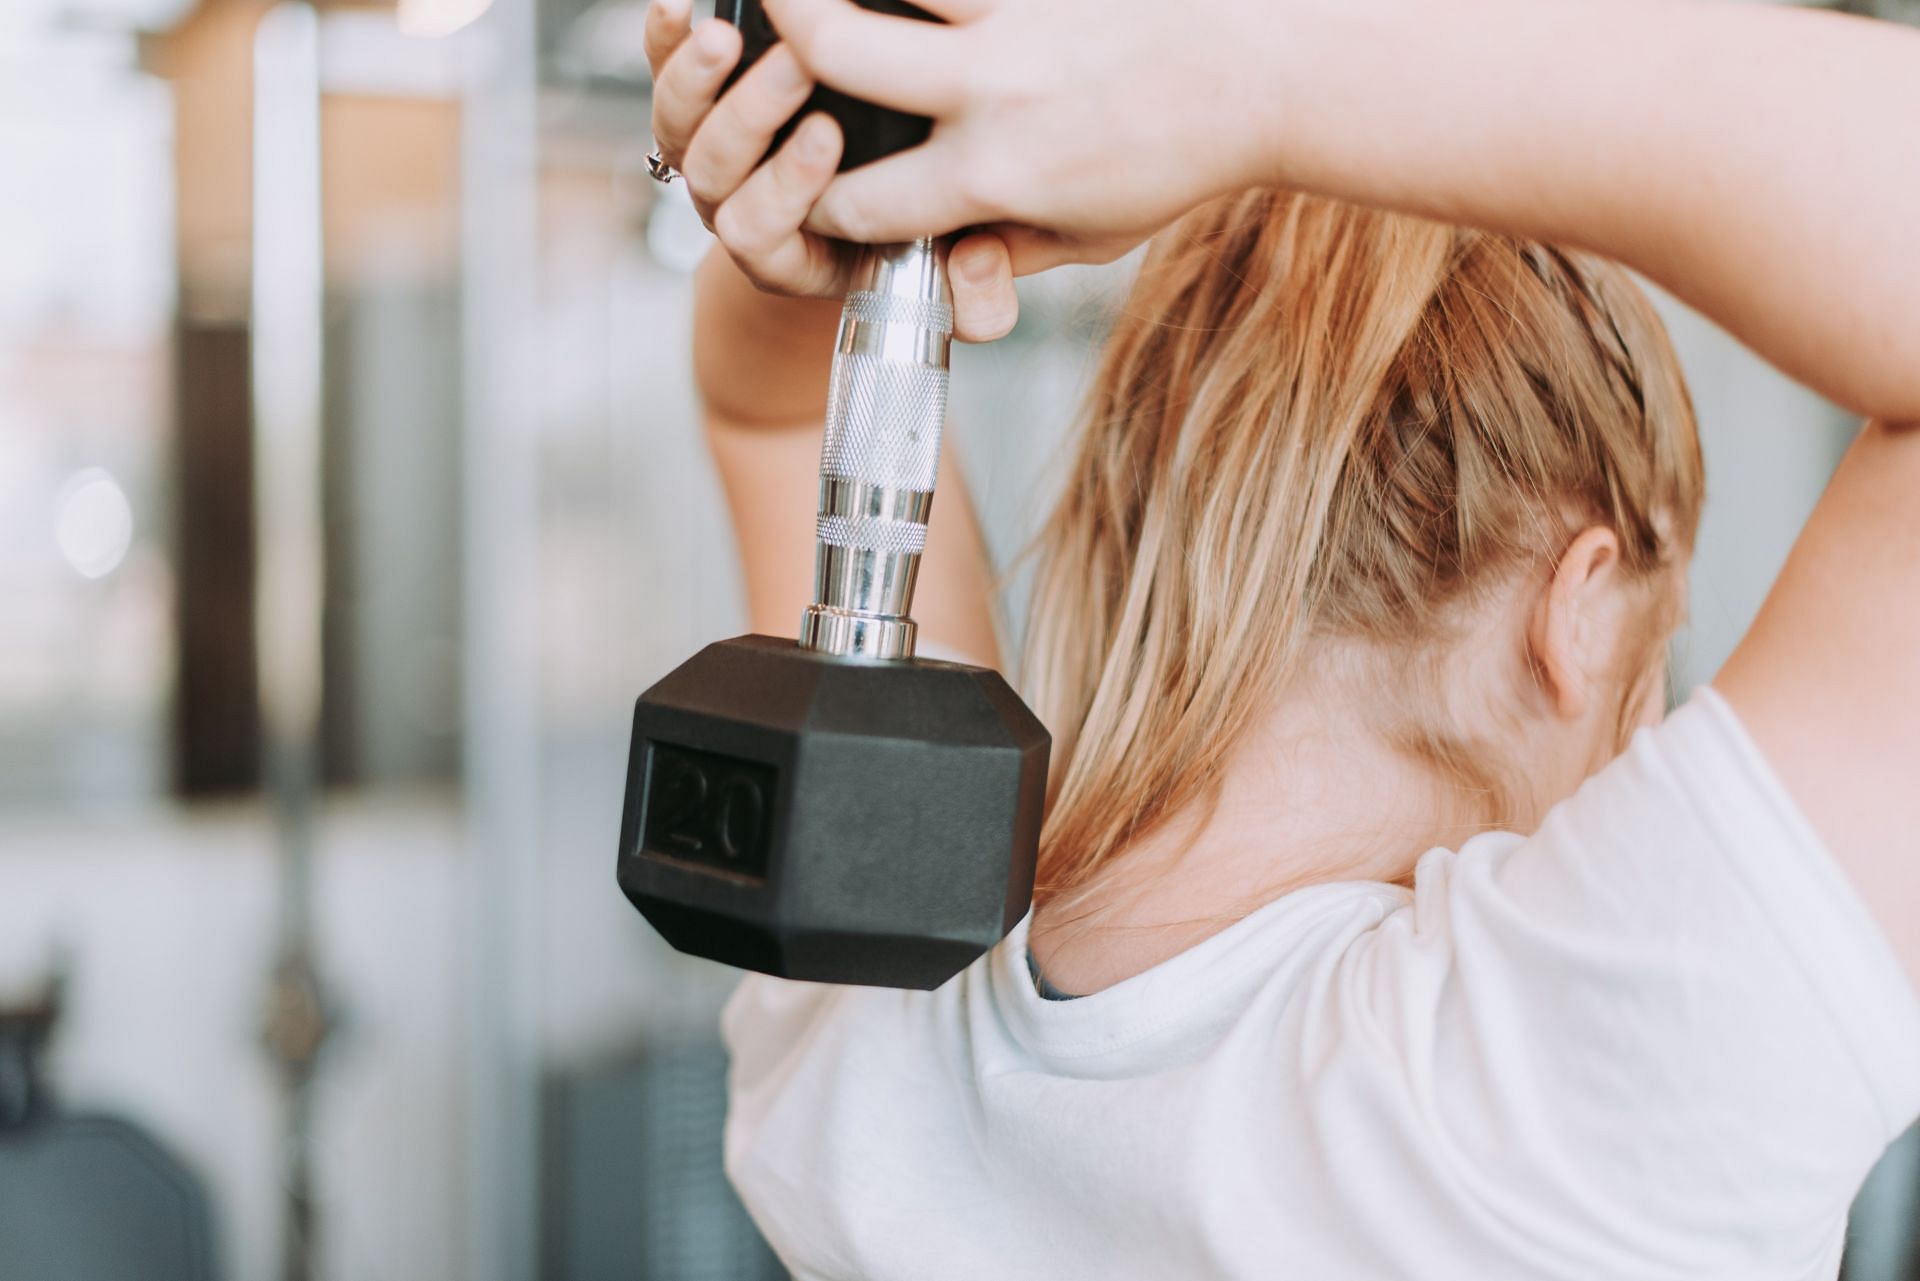 New at working out? Avoid these six common mistakes to for effective results. (Image via Unsplash / Samantha Gades)